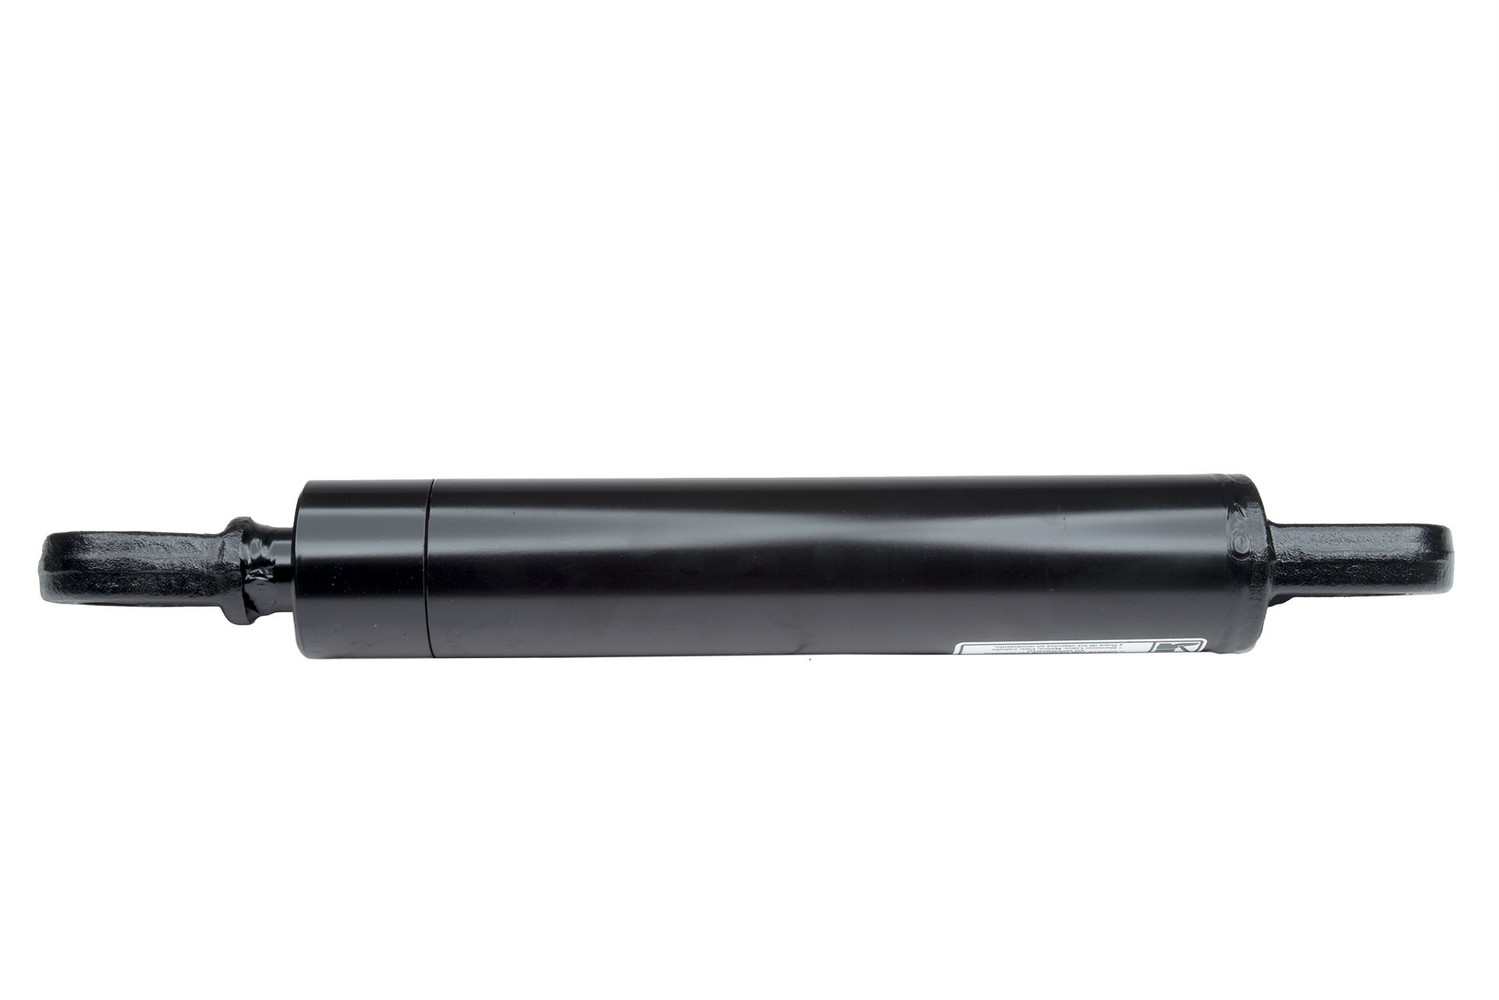 Chief WTG Welded Tang Hydraulic Cylinder: 3.5" Bore x 16" Stroke - 1.75" Rod